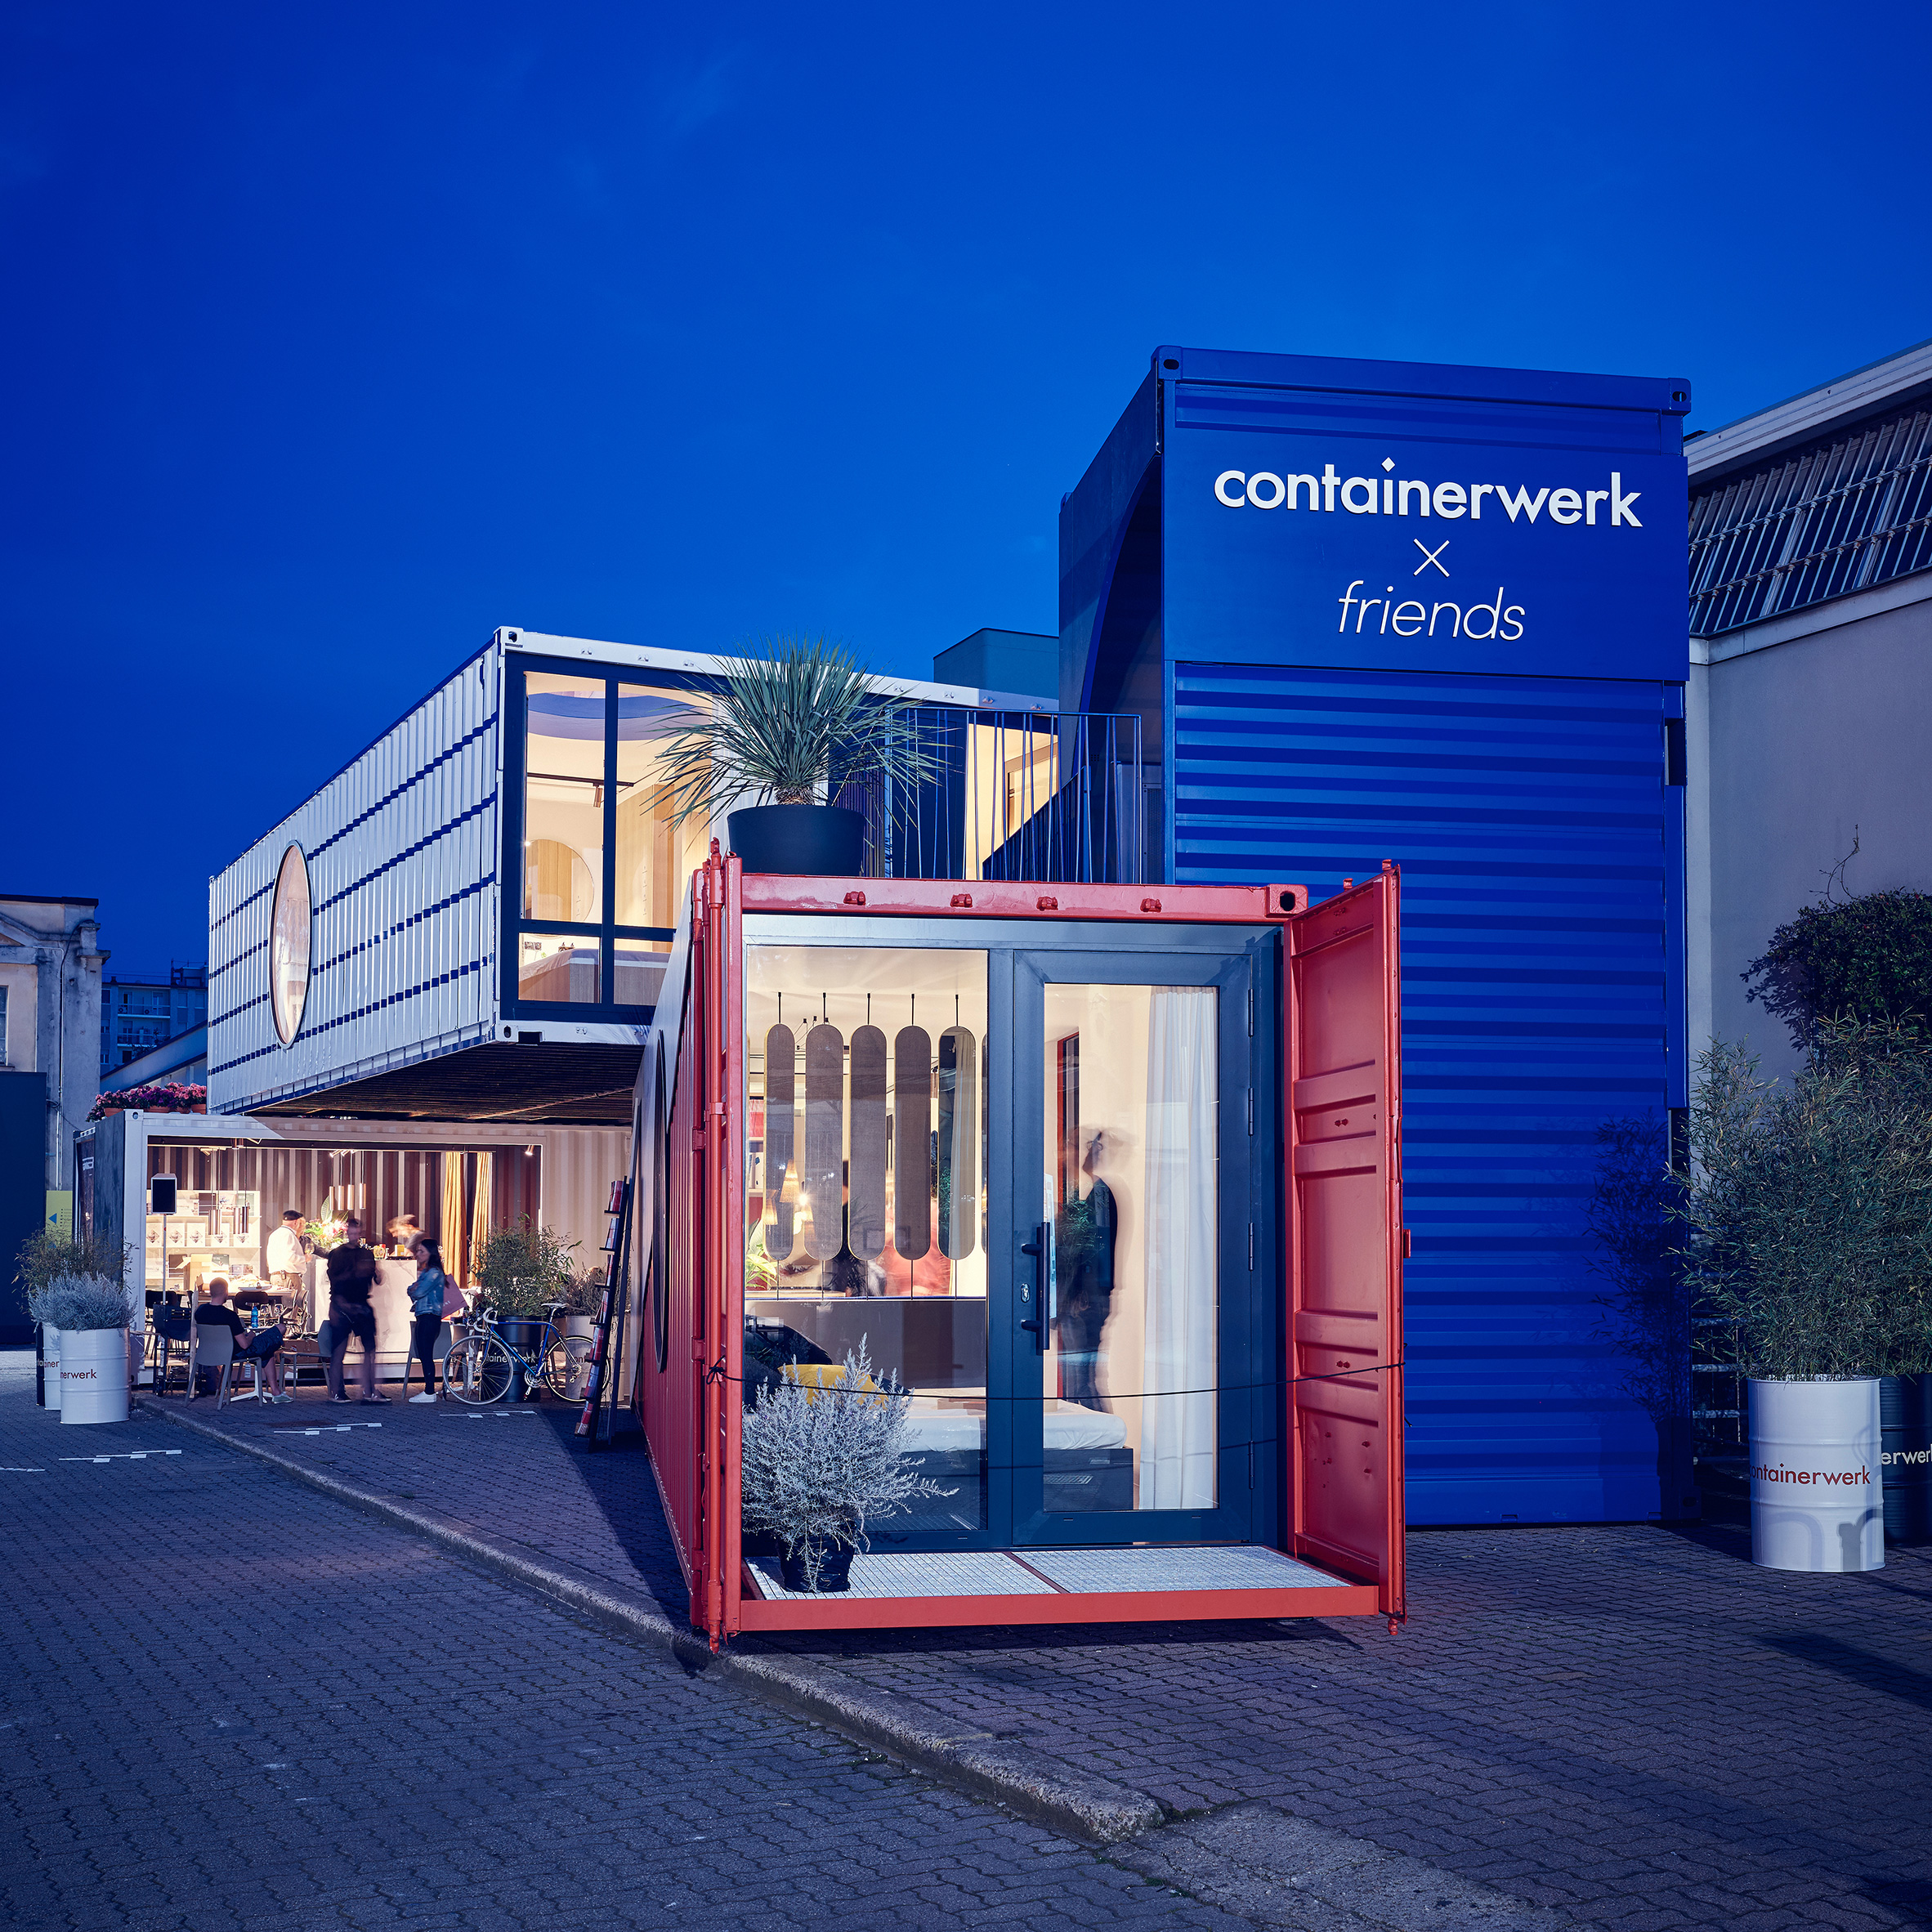 Containerwerk showcases potential of using shipping containers for housing